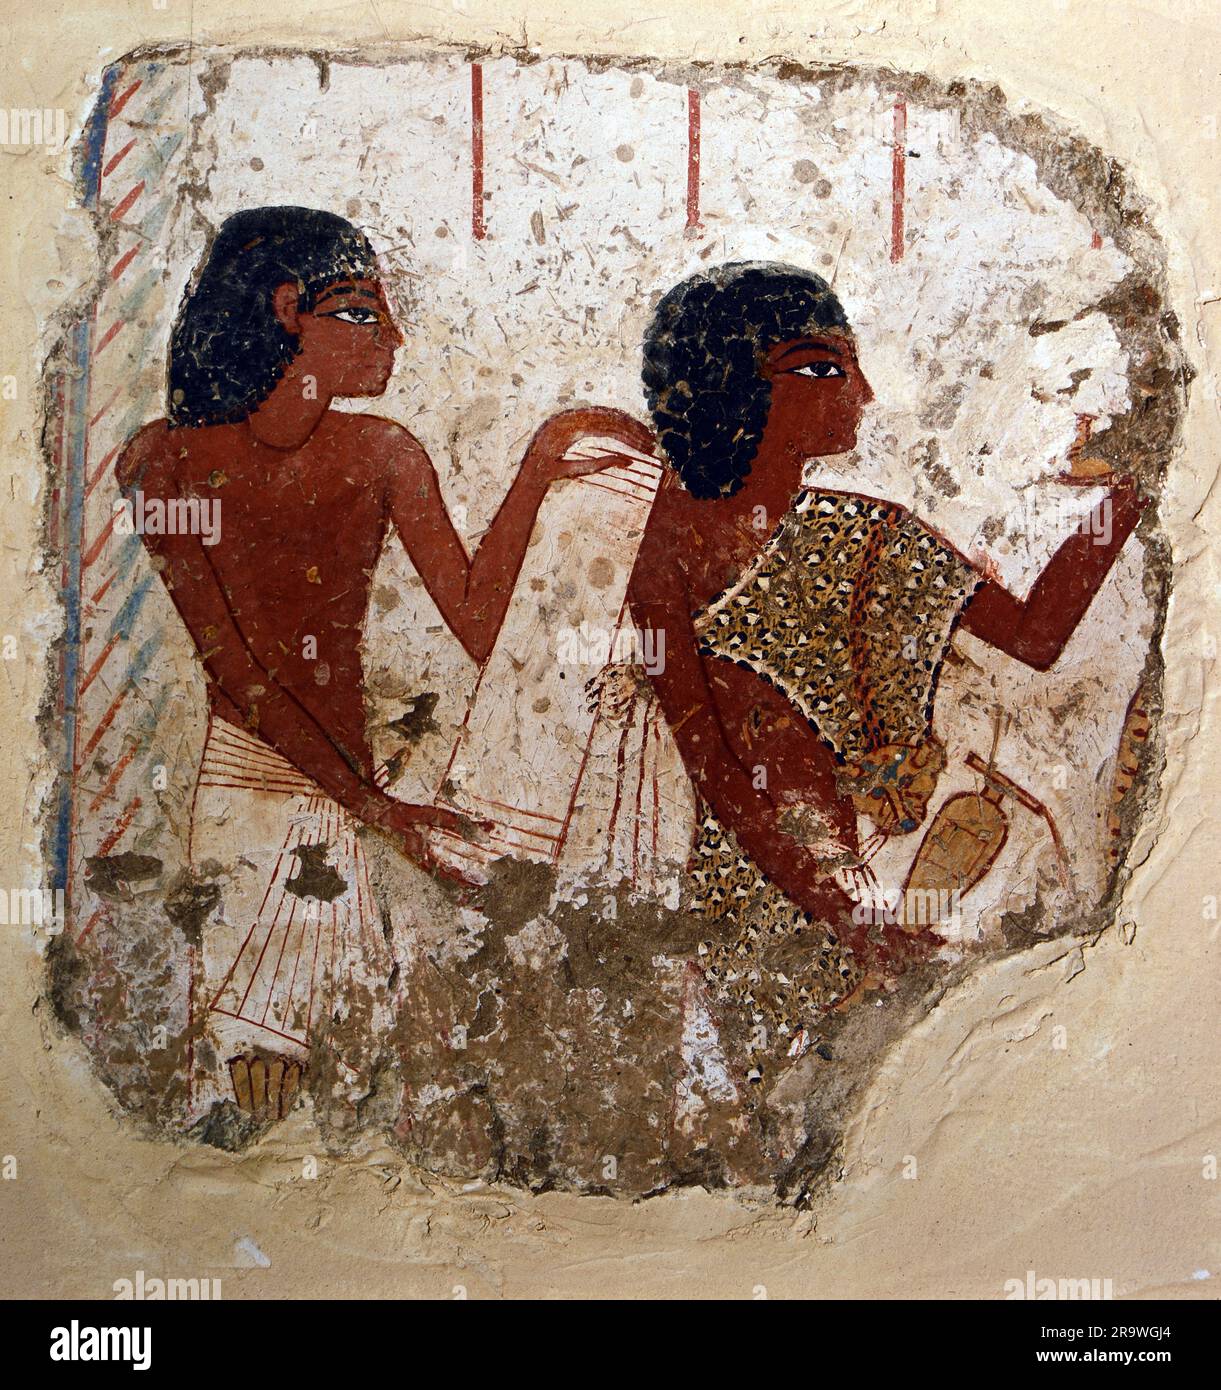 fine arts, Egypt, painting, reading of liturgic texts during the transfer of a dead to his grave, ARTIST'S COPYRIGHT HAS NOT TO BE CLEARED Stock Photo